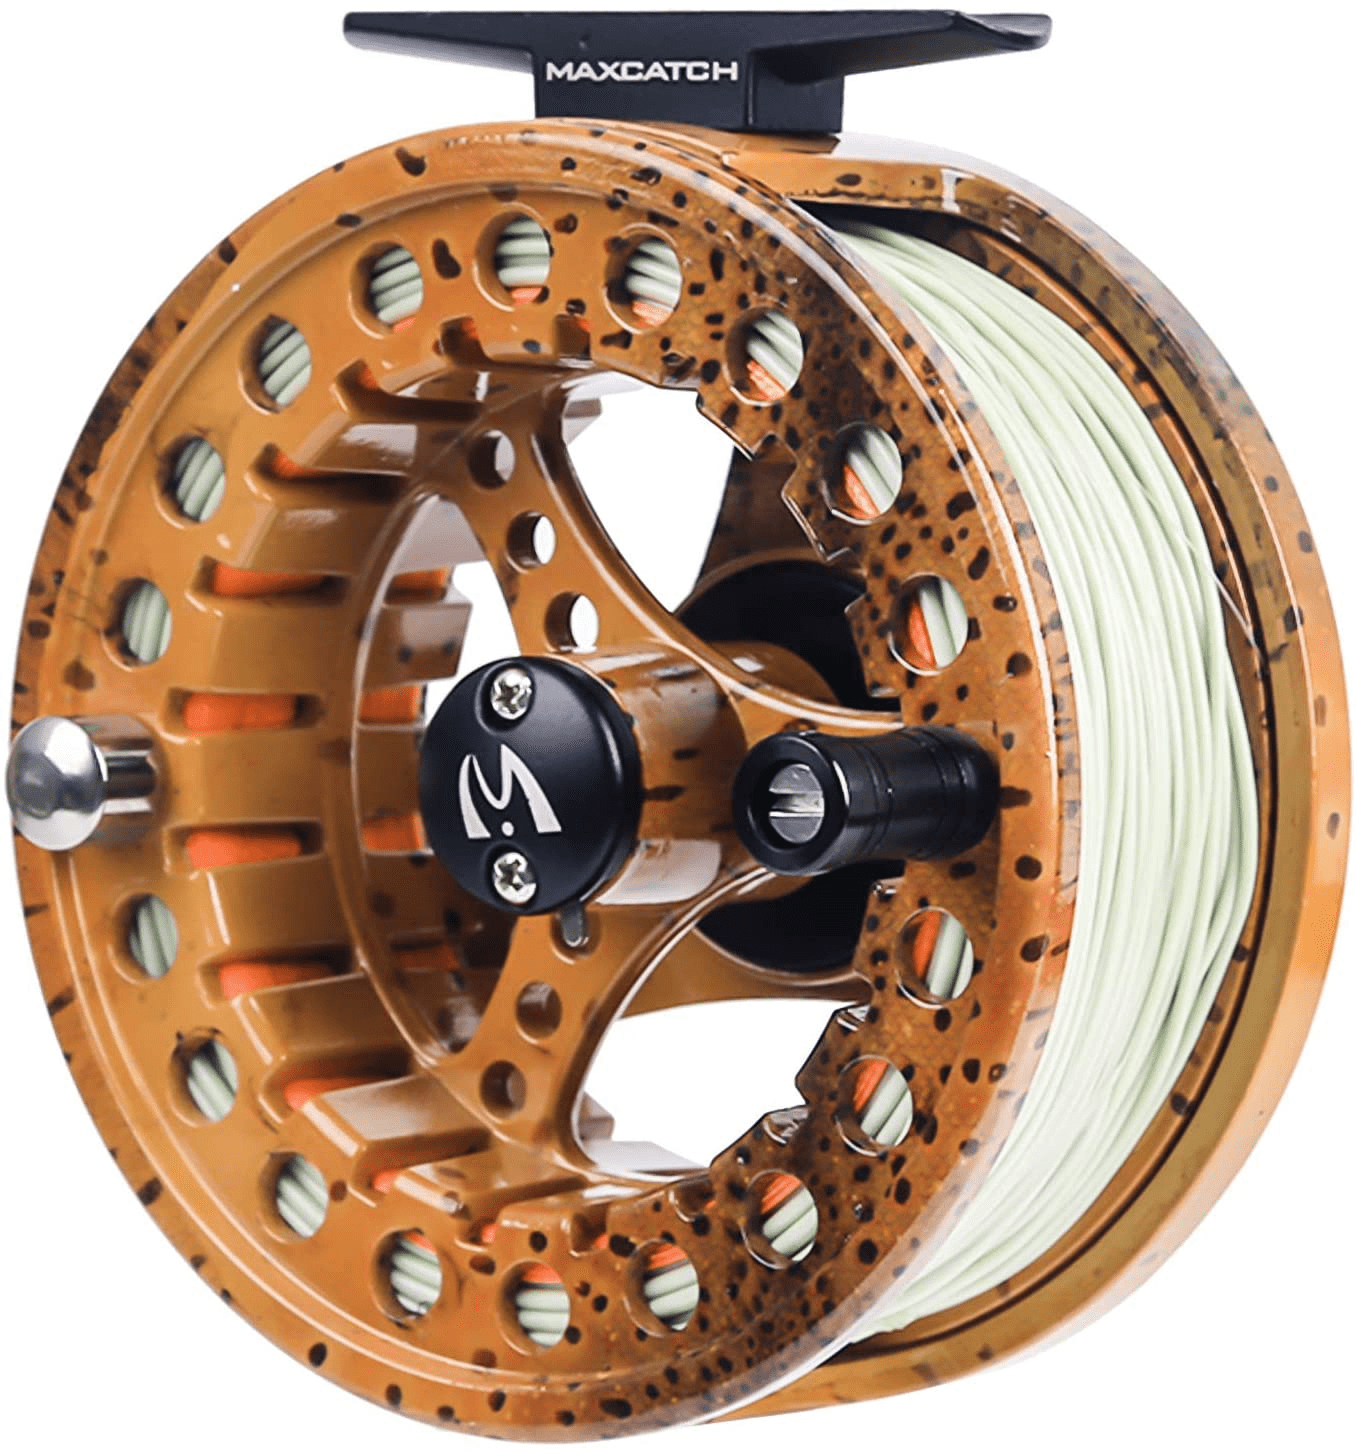 Maxcatch Large Arbor Fly Fishing Reel (3/4Wt 5/6Wt 7/8Wt) and Pre-Loaded Fly Reel with Line Combo